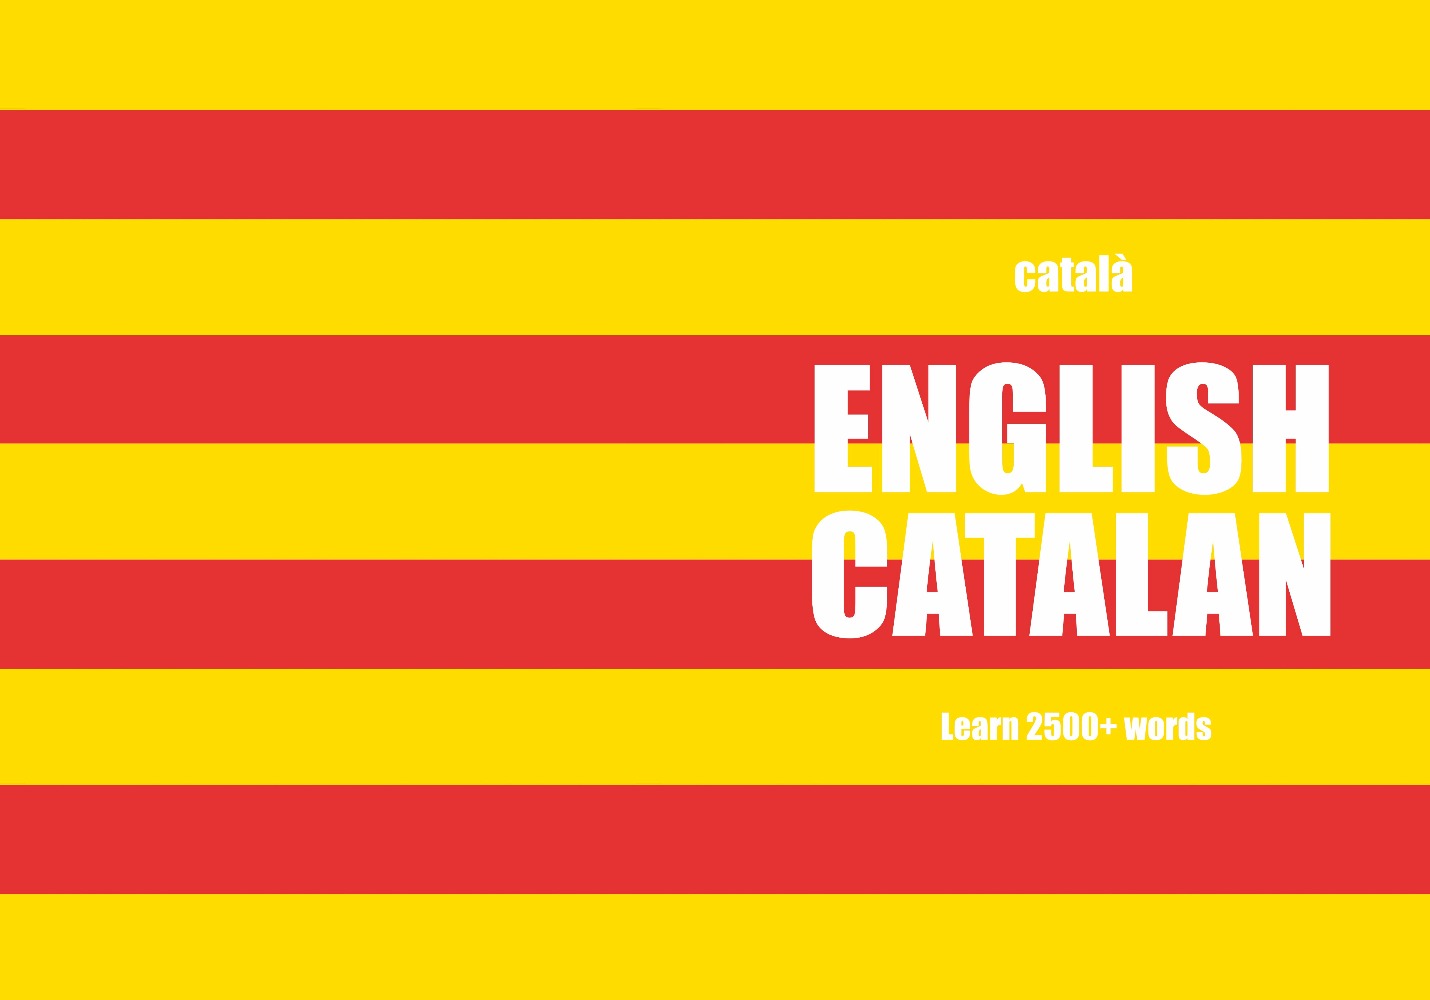 Catalan language learning notebook cover